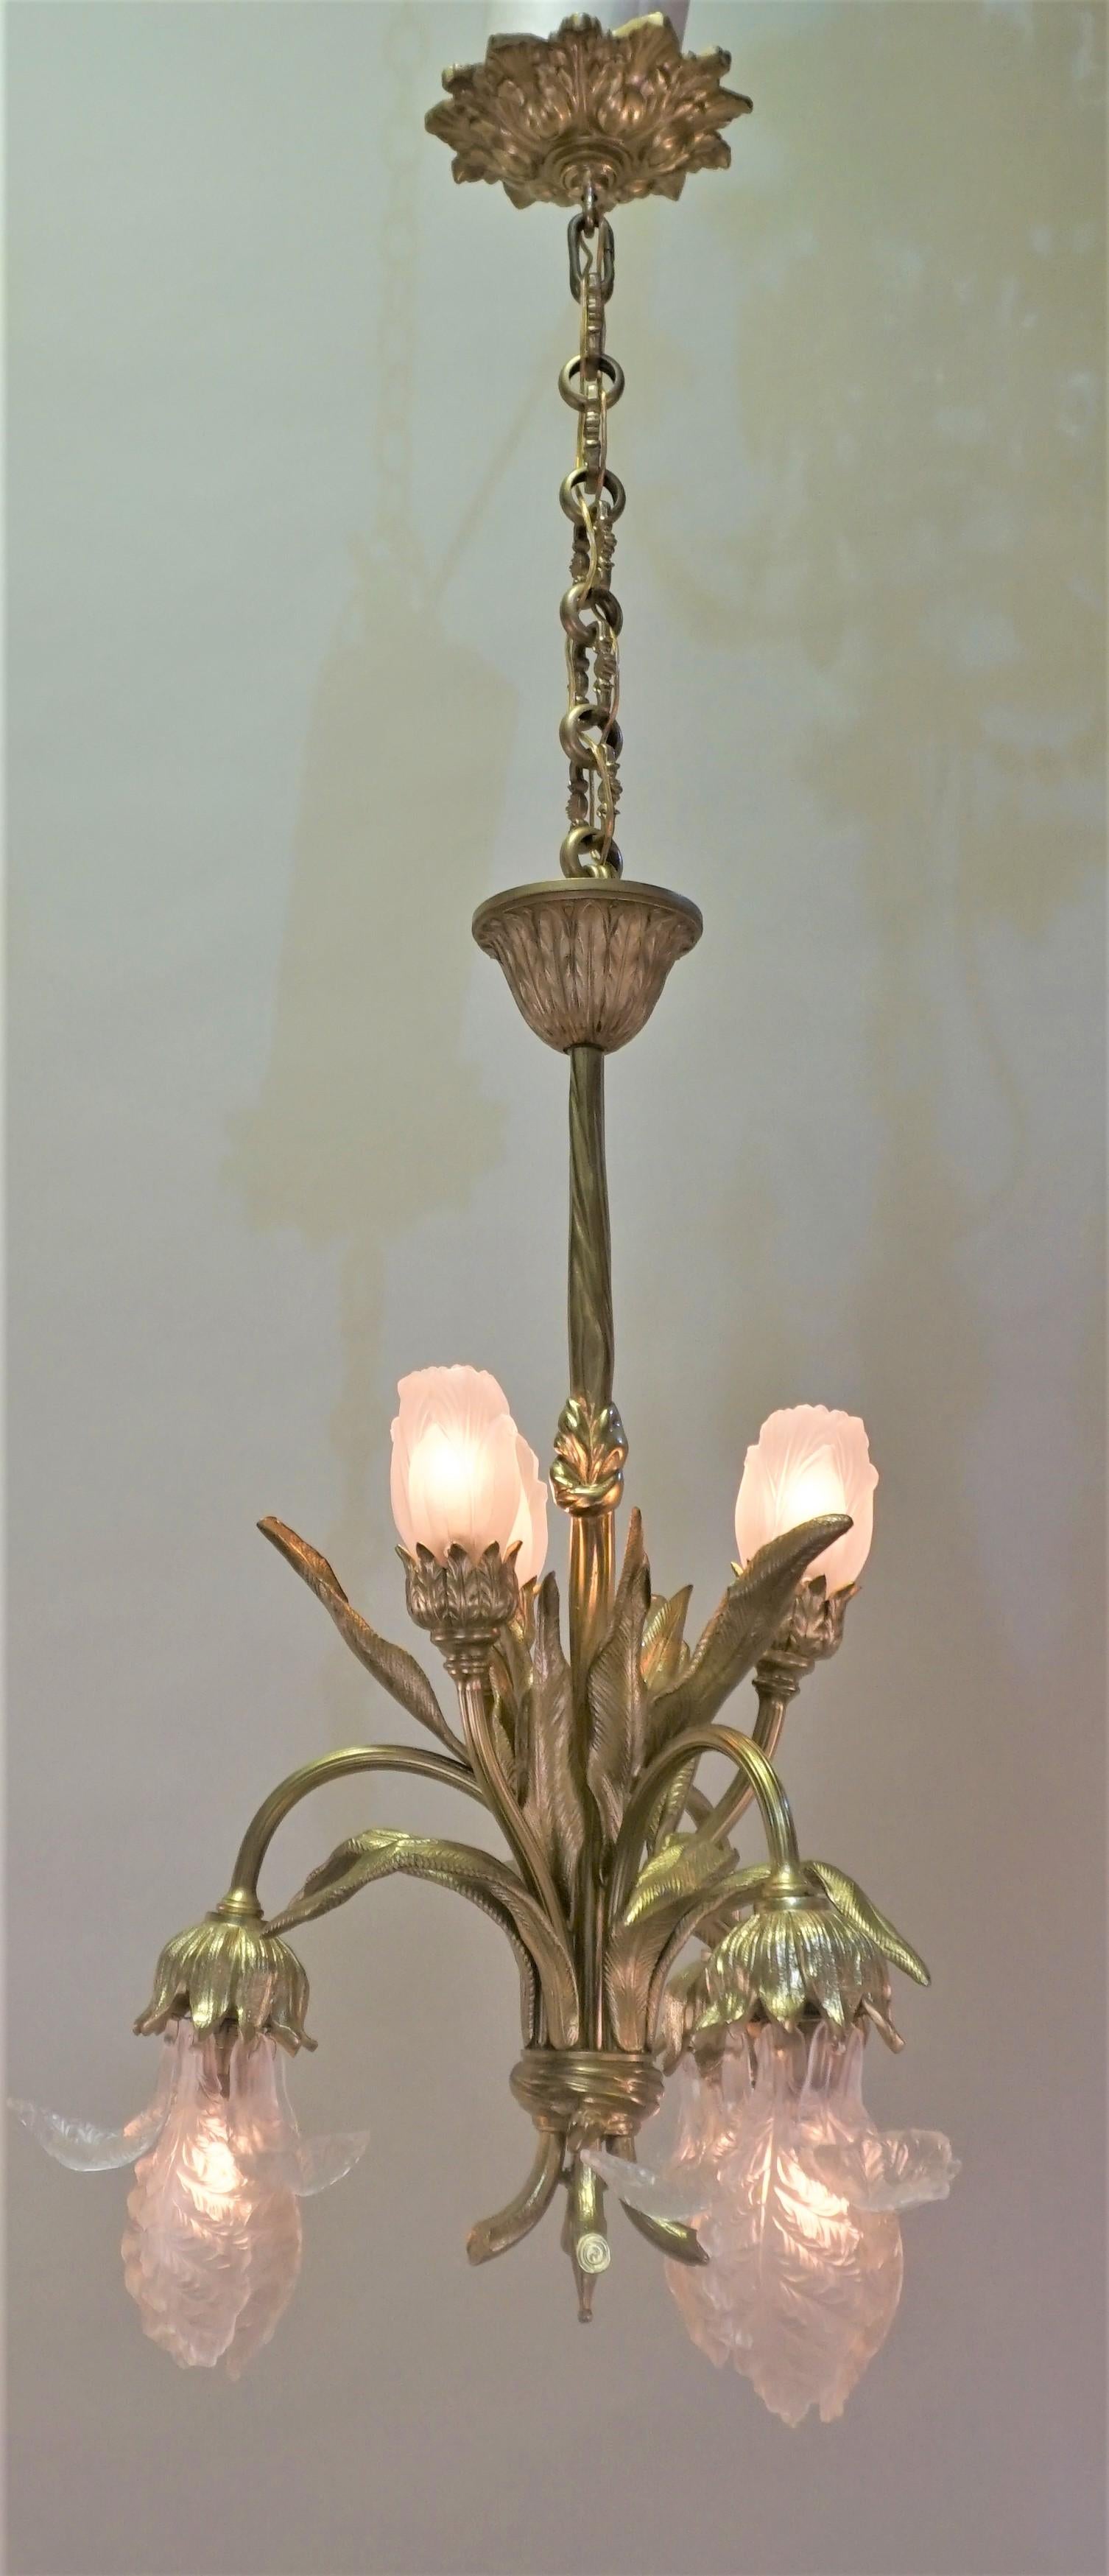 Elegant six-light bronze and Art Nouveau chandelier with six part glass tulip shades.
Total height is 42